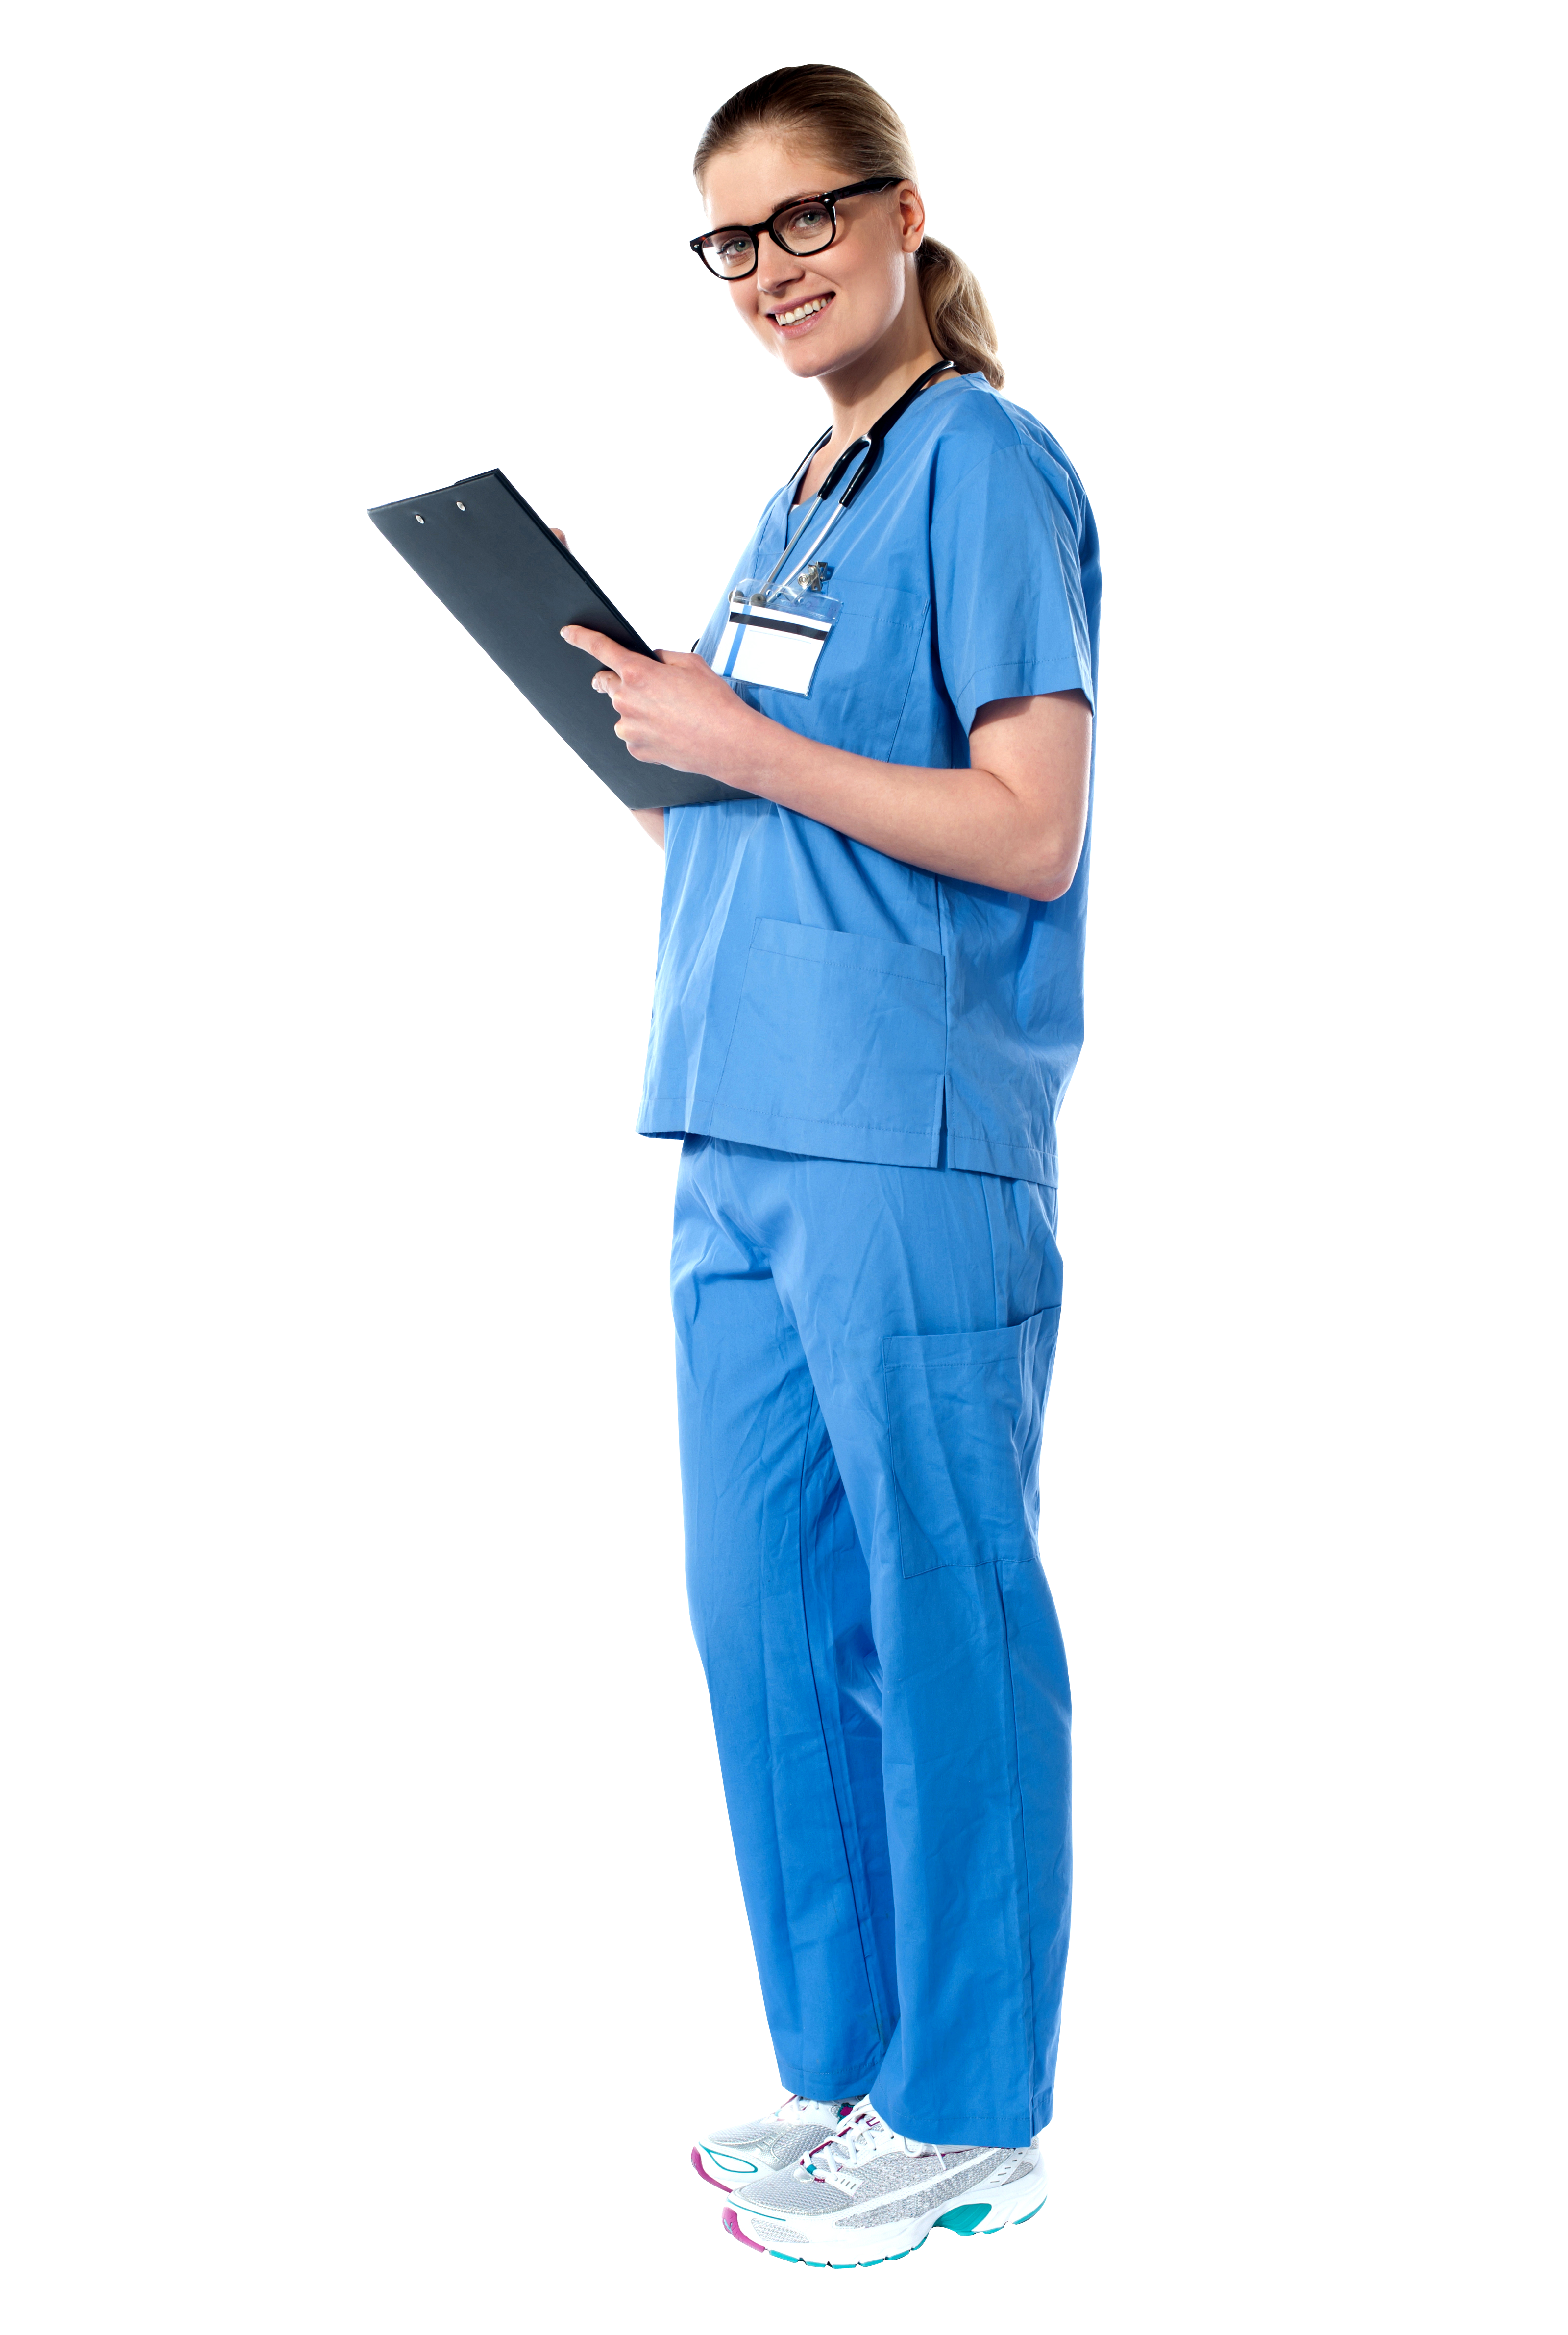 Women Doctor PNG Image